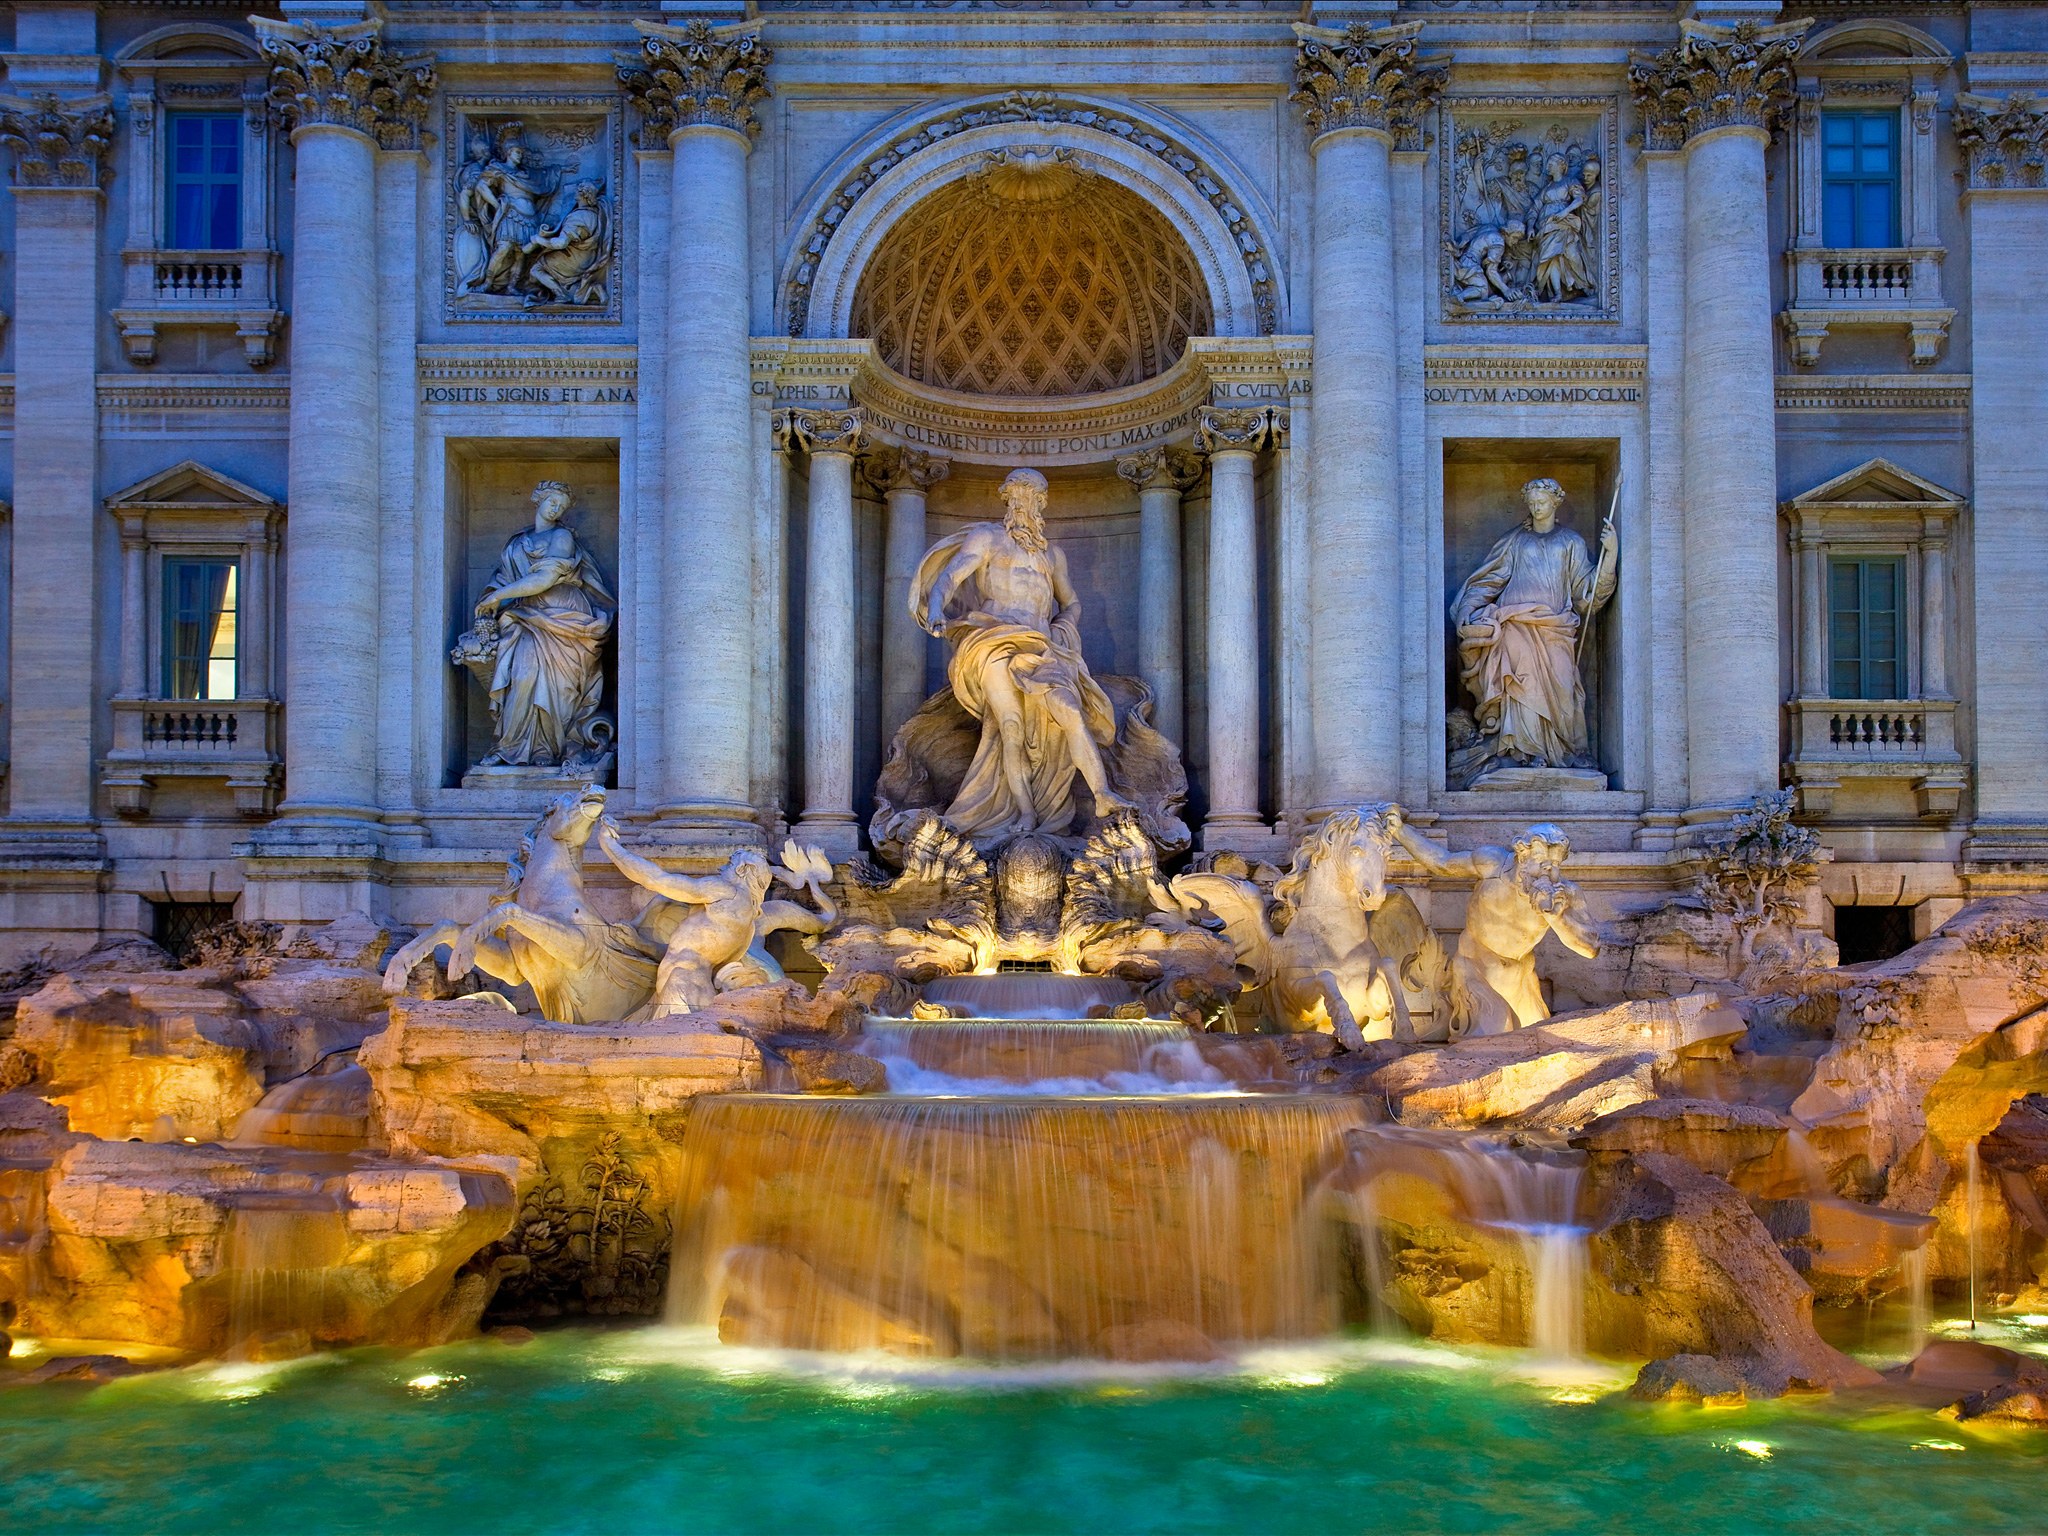 HQ Trevi Fountain Wallpapers | File 900.68Kb